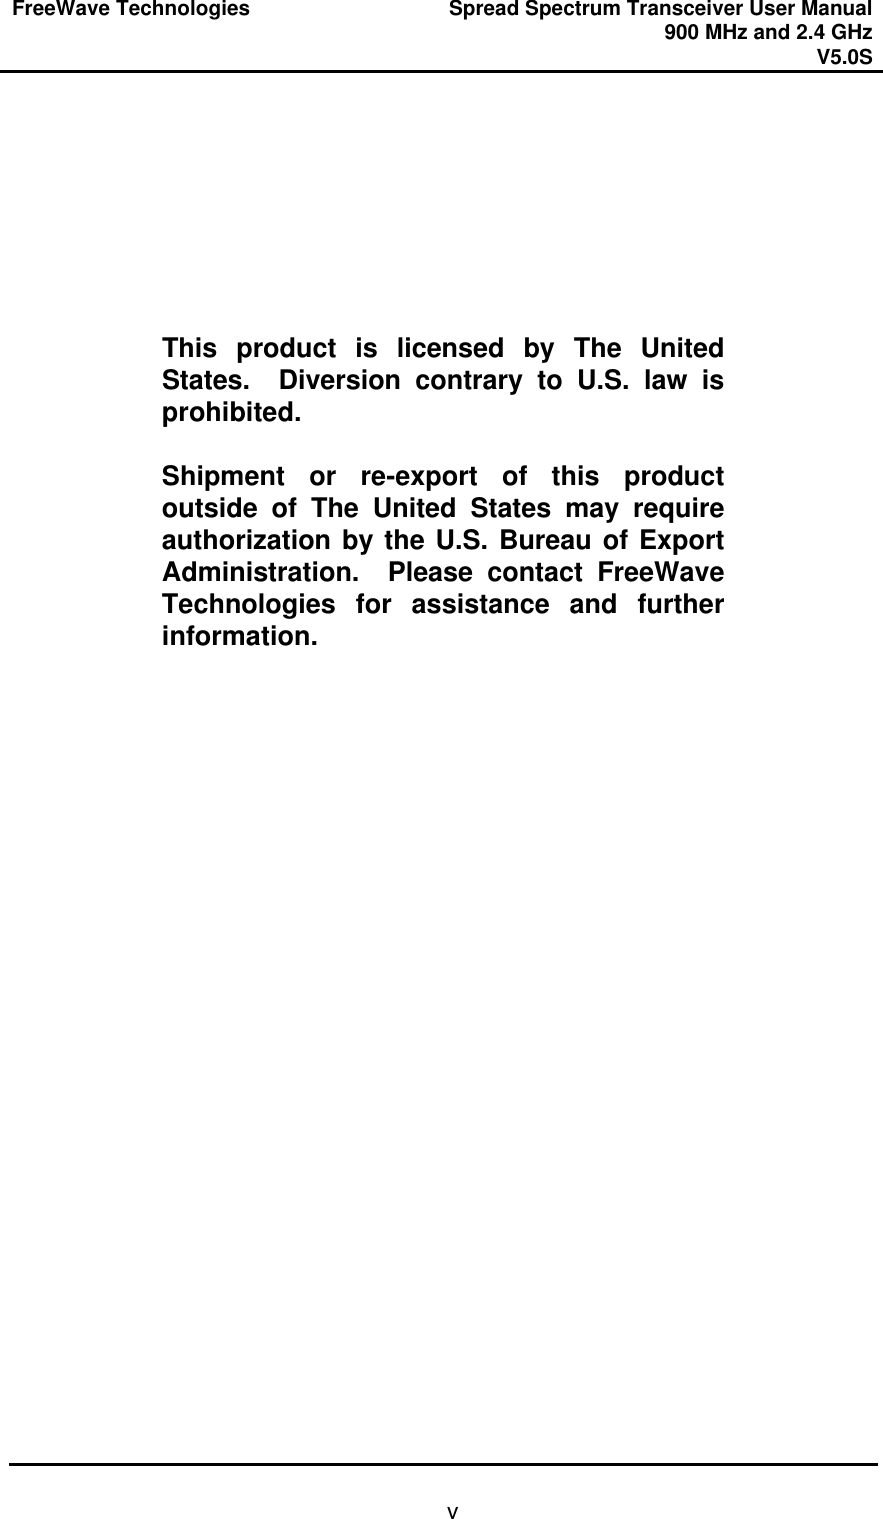 FreeWave Technologies Spread Spectrum Transceiver User Manual 900 MHz and 2.4 GHz V5.0S   v        This product is licensed by The United States.  Diversion contrary to U.S. law is prohibited.  Shipment or re-export of this product outside of The United States may require authorization by the U.S. Bureau of Export Administration.  Please contact FreeWave Technologies for assistance and further information.  